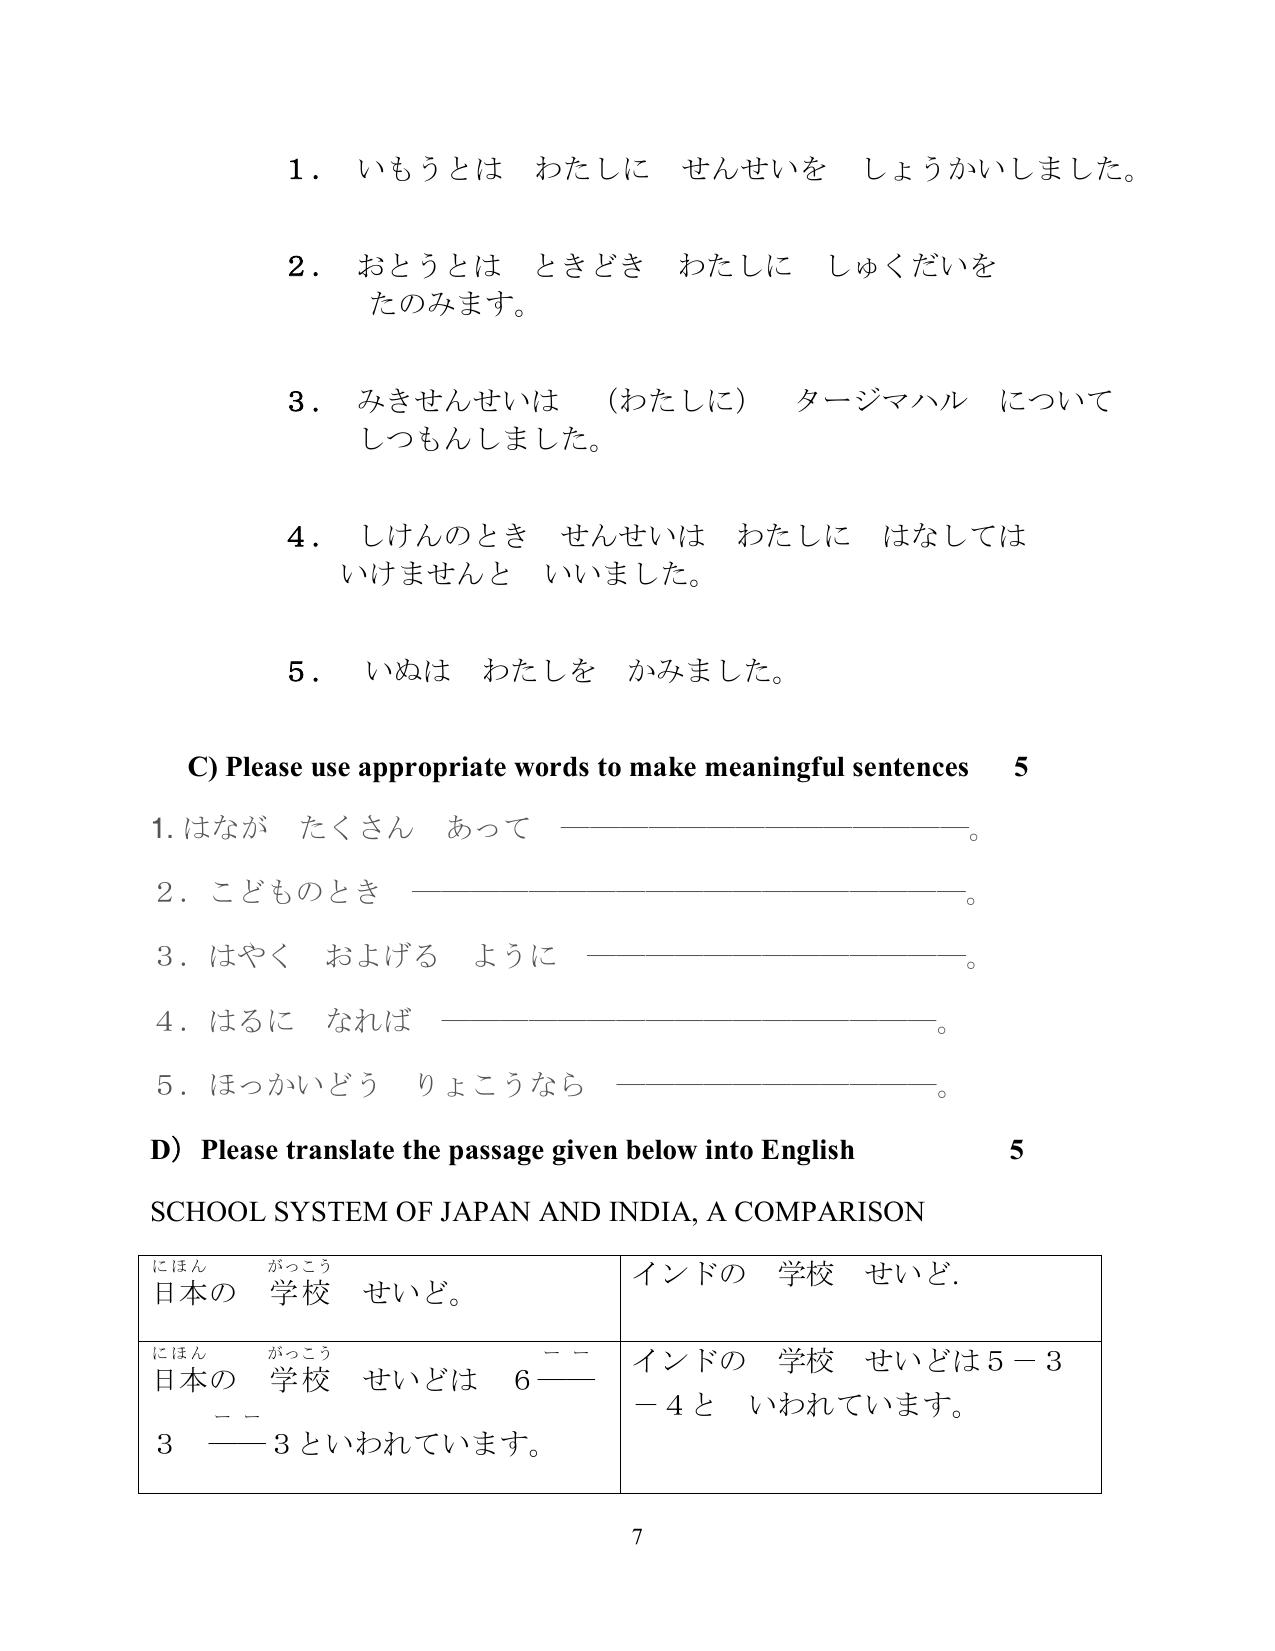 CBSE Class 12 Japanese -Sample Paper 2019-20 - Page 7